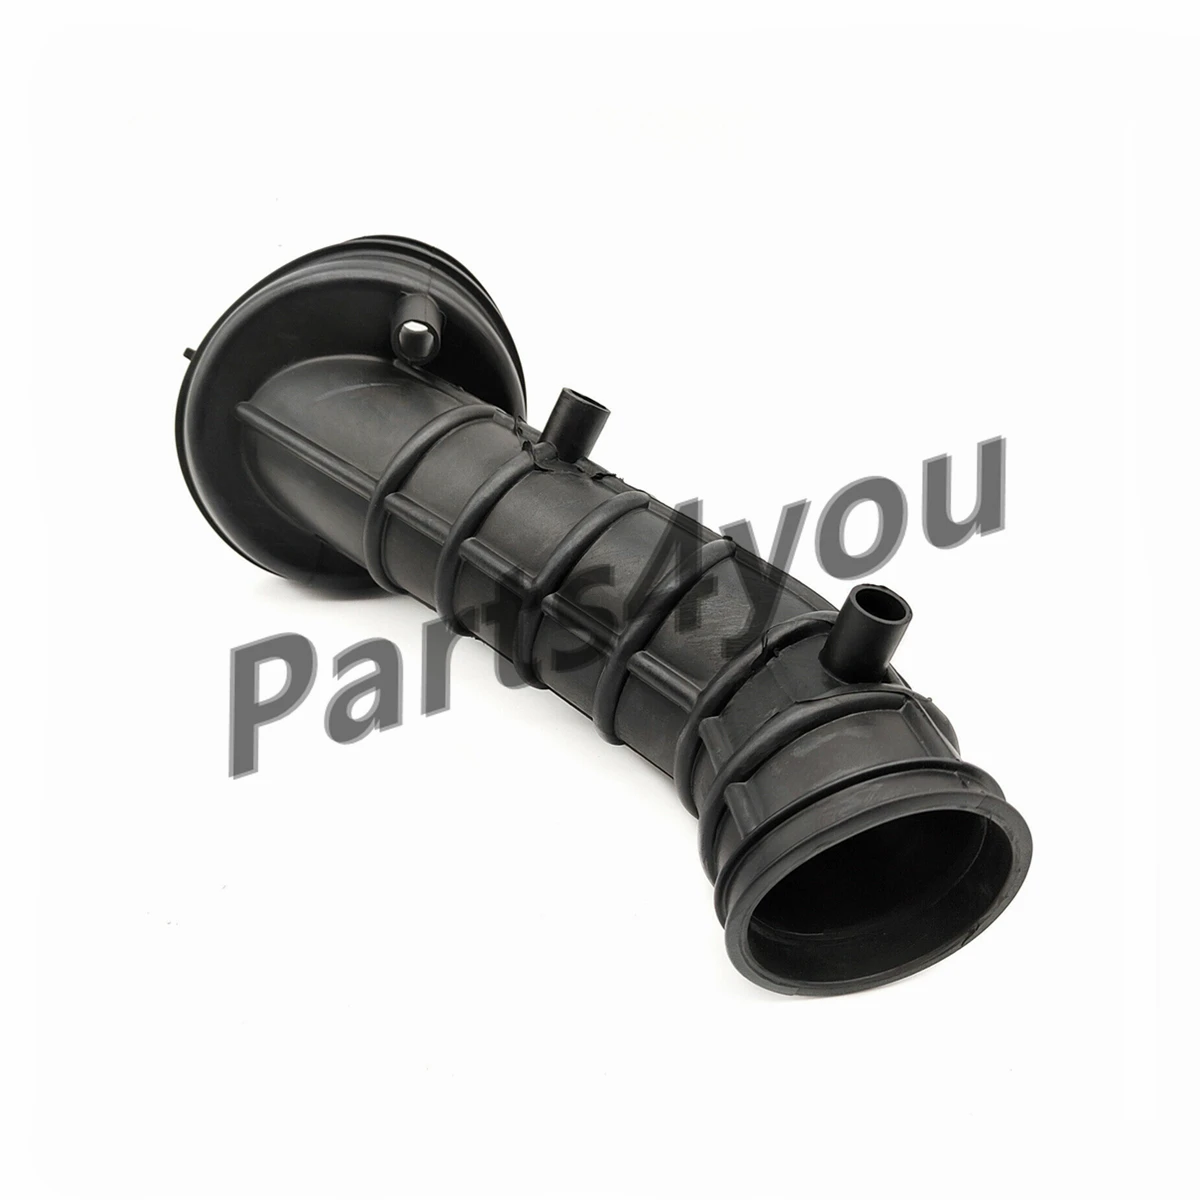 Exhaust Pipe Air Outlet Pipe for CFmoto 500 X5 CF500-5B CF500-5C 600 X6 625 Goes 625i ATV 018B-110008